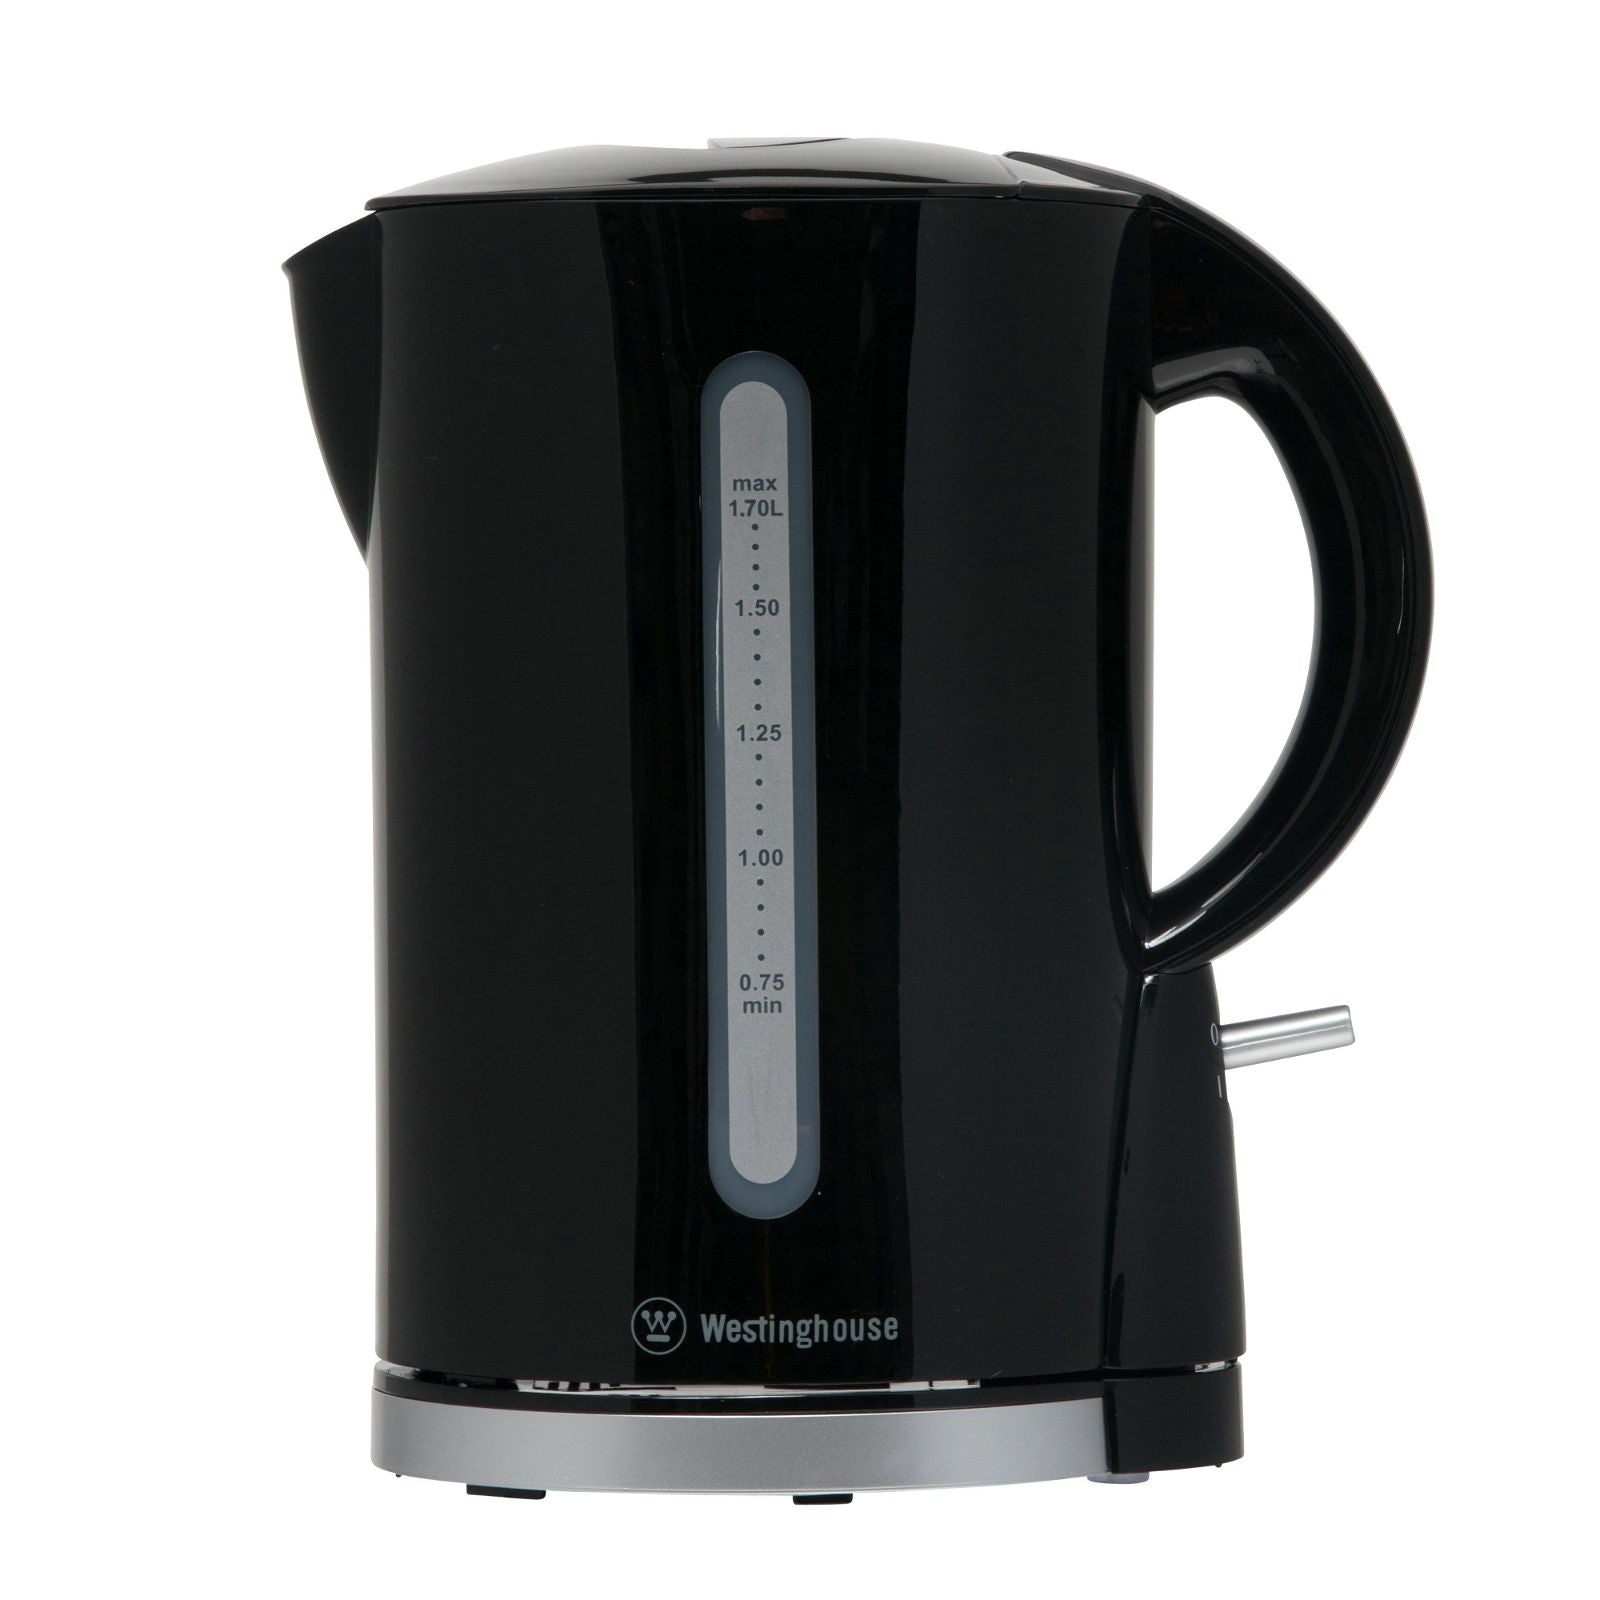 Westinghouse Kettle 1.7L Black-#product_category#- Distributed by:  under license